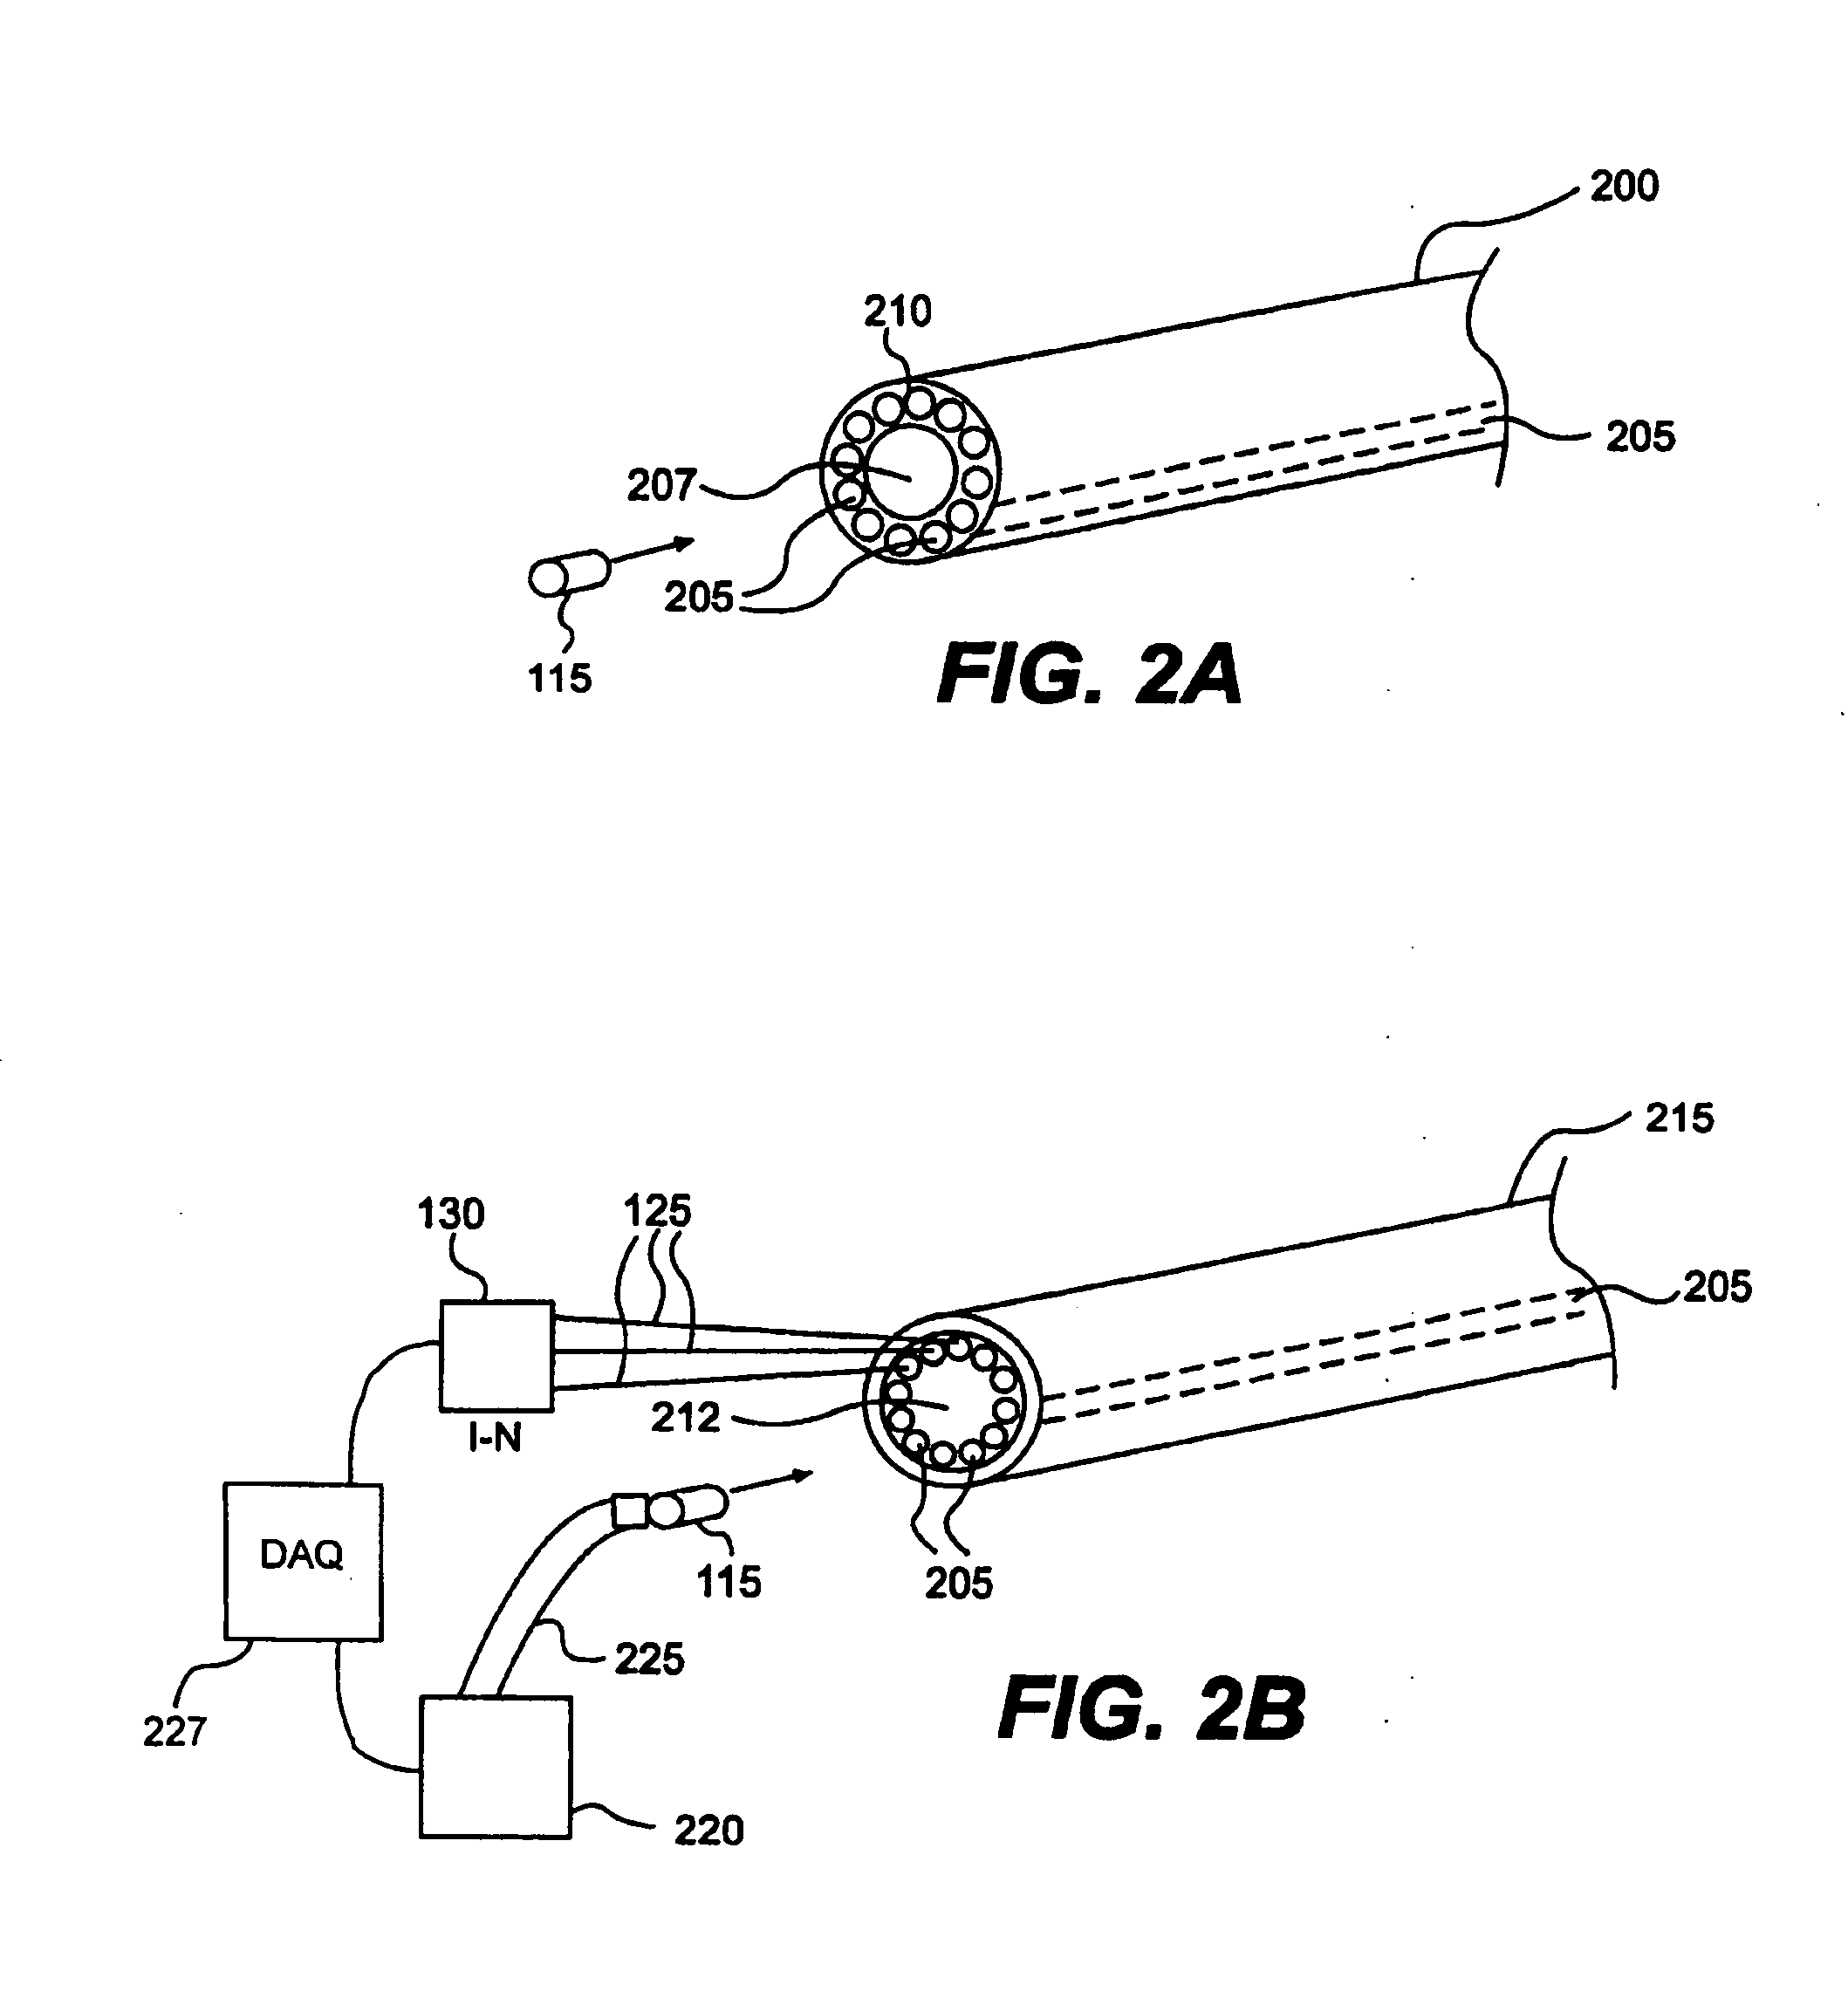 Apparatus and method for brachytherapy radiation distribution mapping